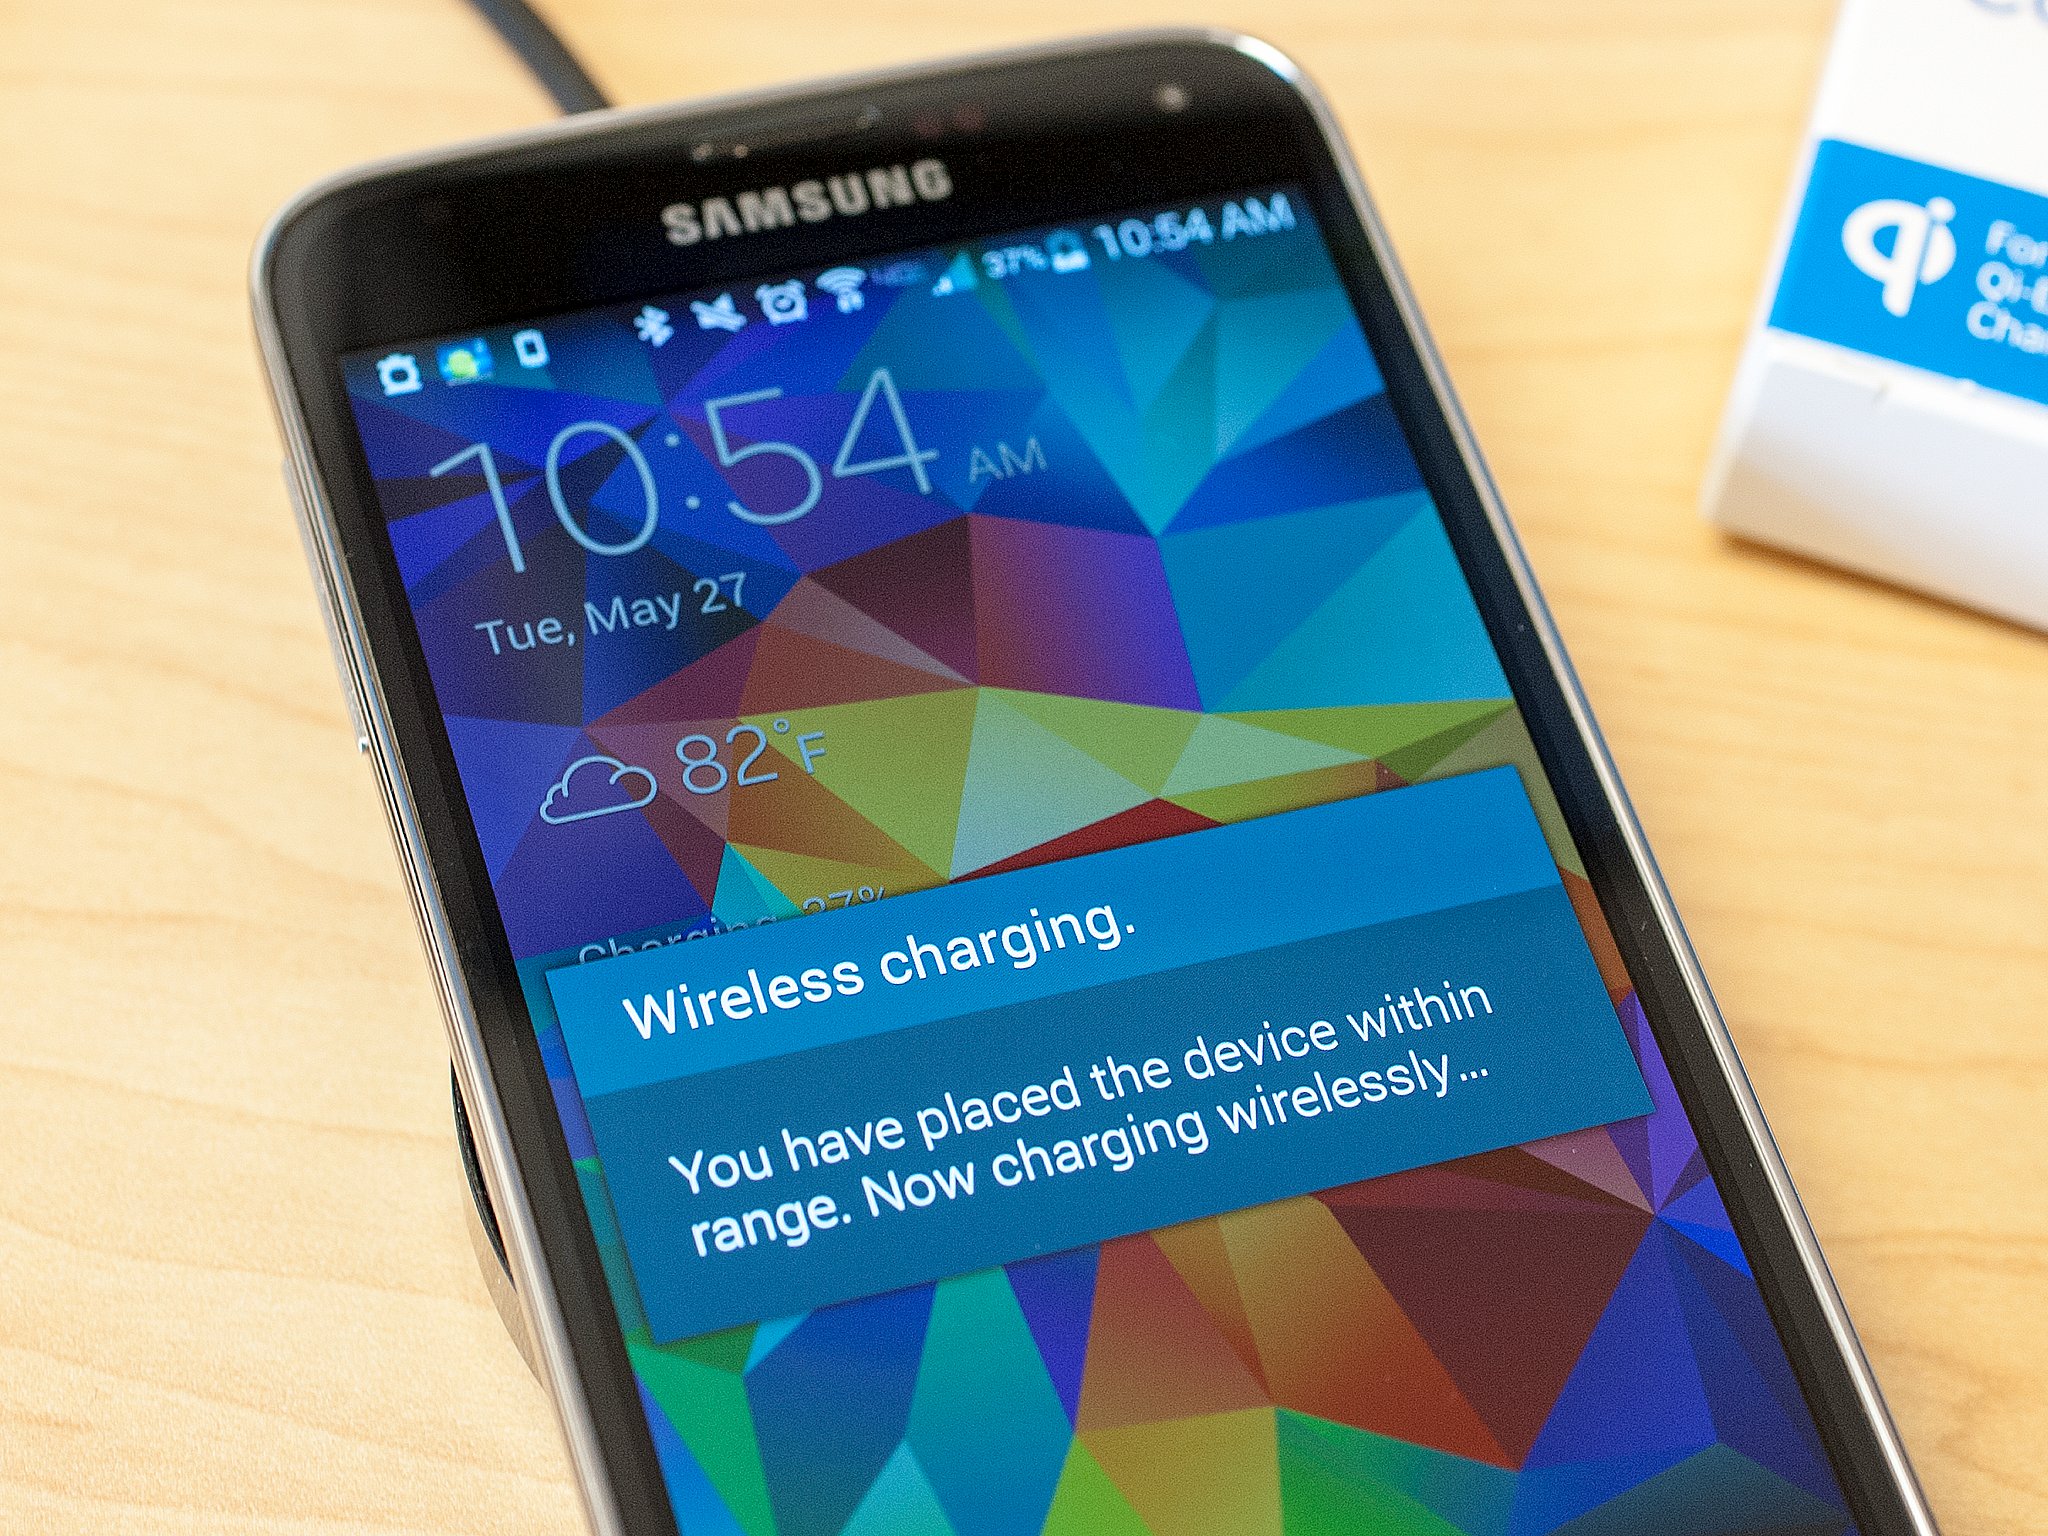 How do you charge a Samsung device wirelessly?